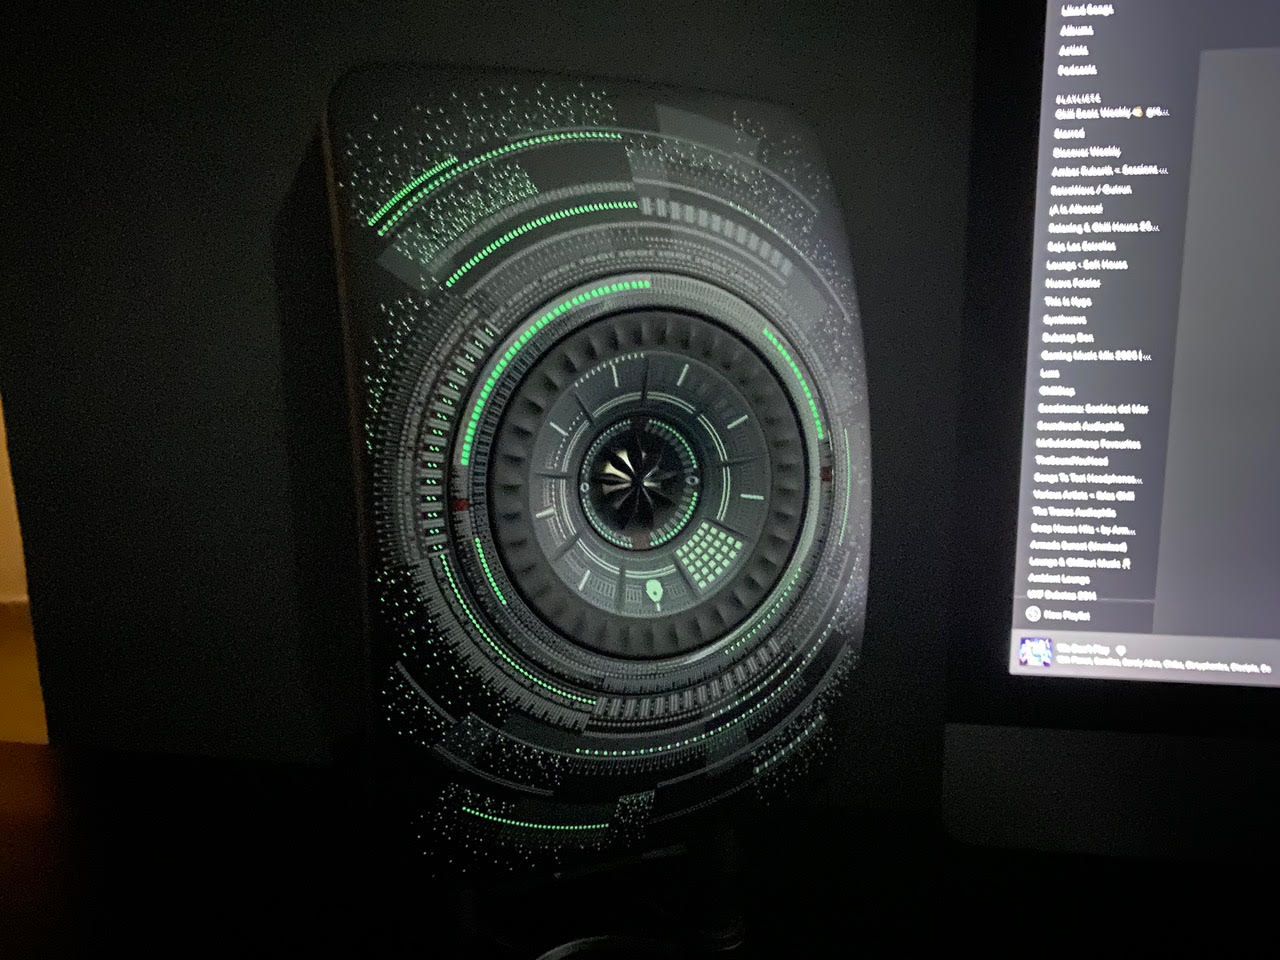 You know it's a cool setup when a speaker looks like it takes its design straight from Star Wars.